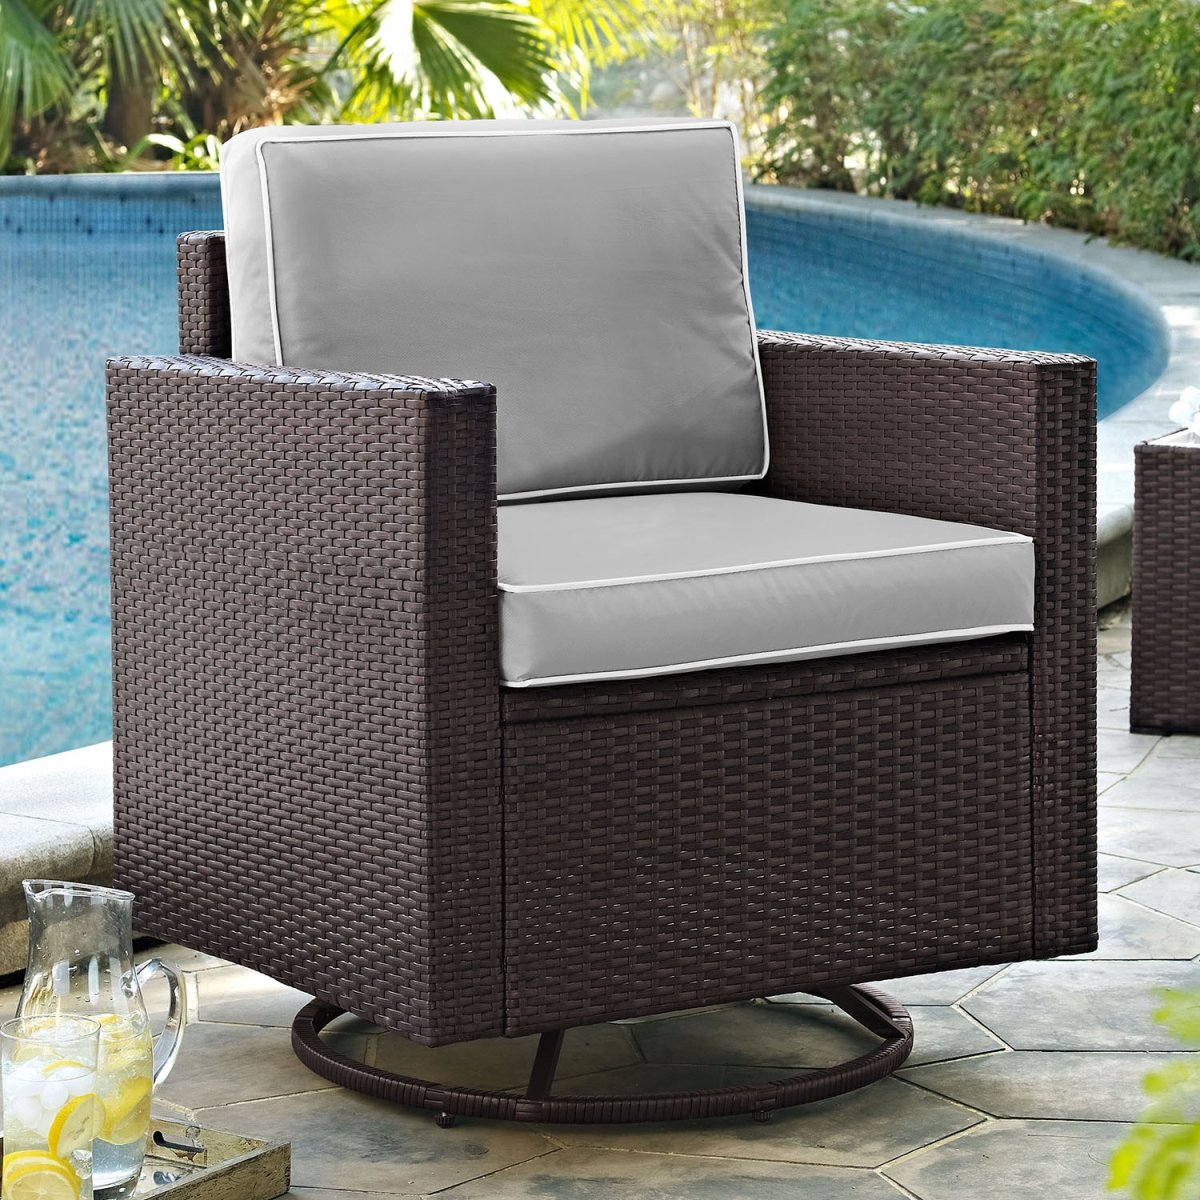 Ko70094br-gy Palm Harbor Outdoor Wicker Swivel Rocker Chair With Grey Cushions